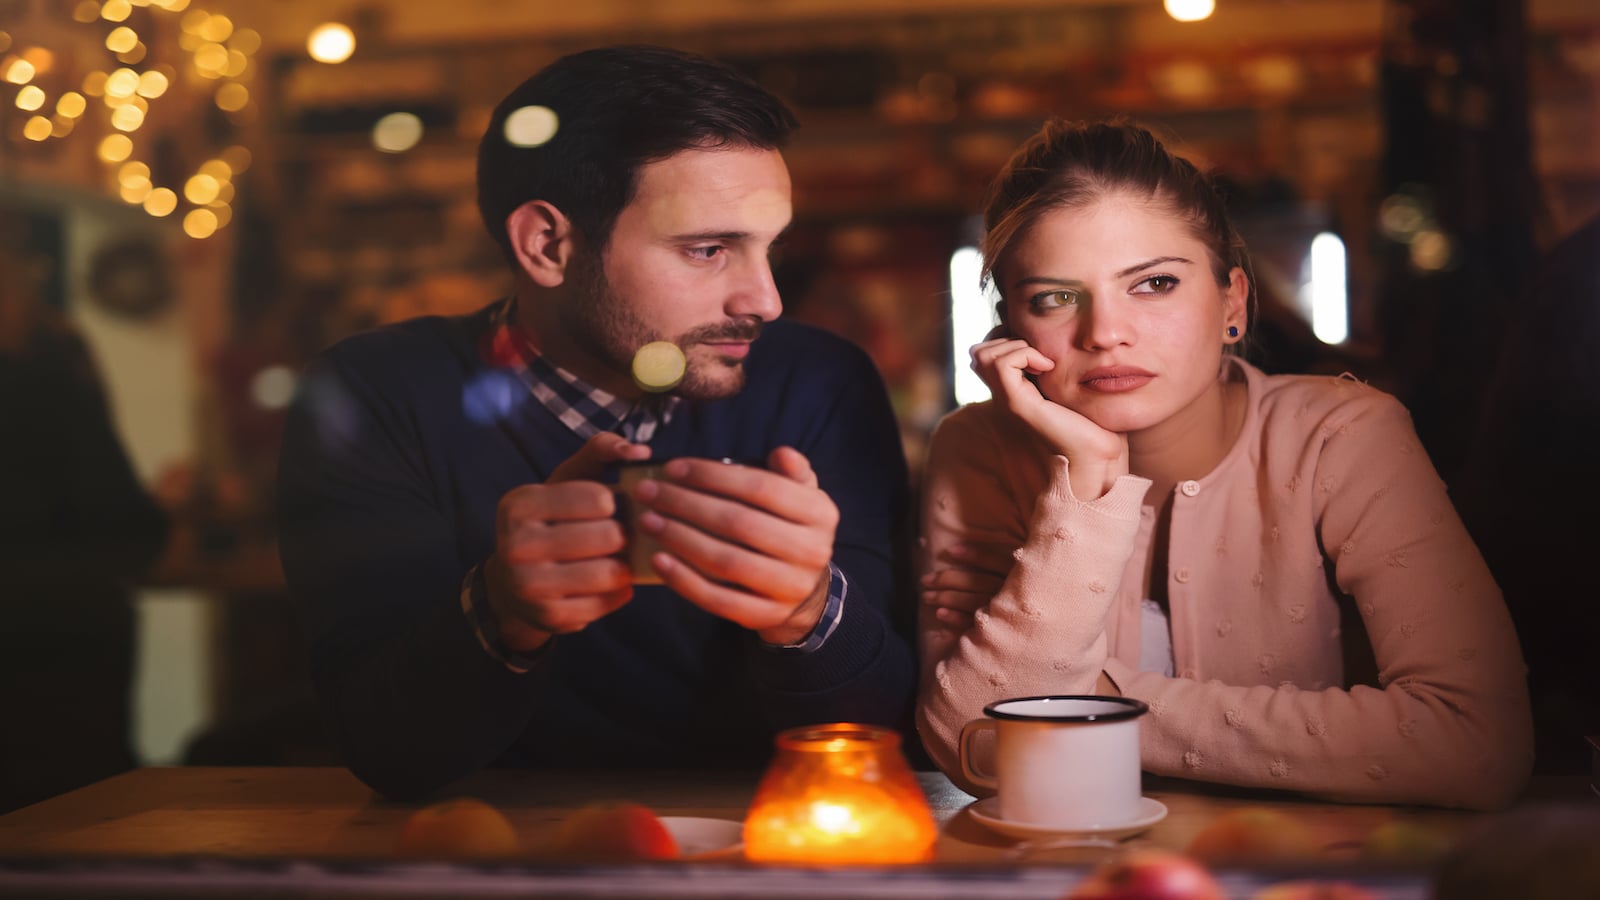 <p><span>Let’s take the scenario from the previous point. Two people at dinner, one absorbed in their phone and one hoping for a nice date. The person staring at the phone snaps or claps at the waiter, flagging them down with little regard for their humanity. </span></p><p><span>The other party watches, horrified. They grow even more terrified by the way the person speaks to the waiter as they exist beneath them because of their profession. Speak to everyone in the same kind tone.</span></p>